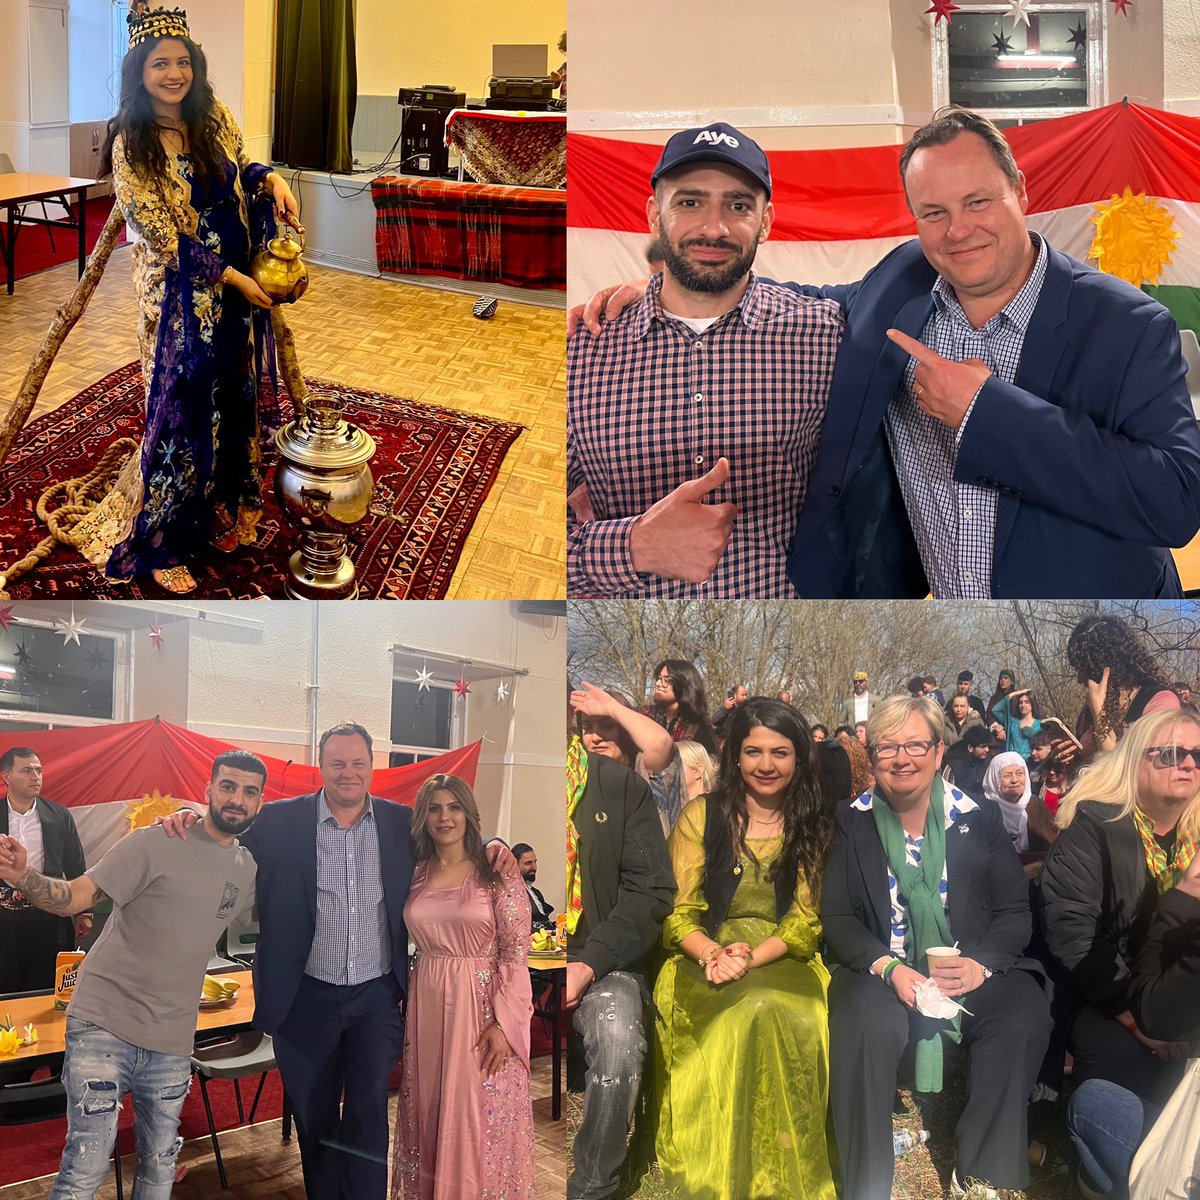 The Kurdish community in Glasgow & Edinburgh would like to thank @ChrisStephens & @joannaccherry for celebrating #Newroz with us over the weekend. Your support is appreciated. #Newroz #Scotland #Kurds We hope you enjoyed the dance & our traditional food.